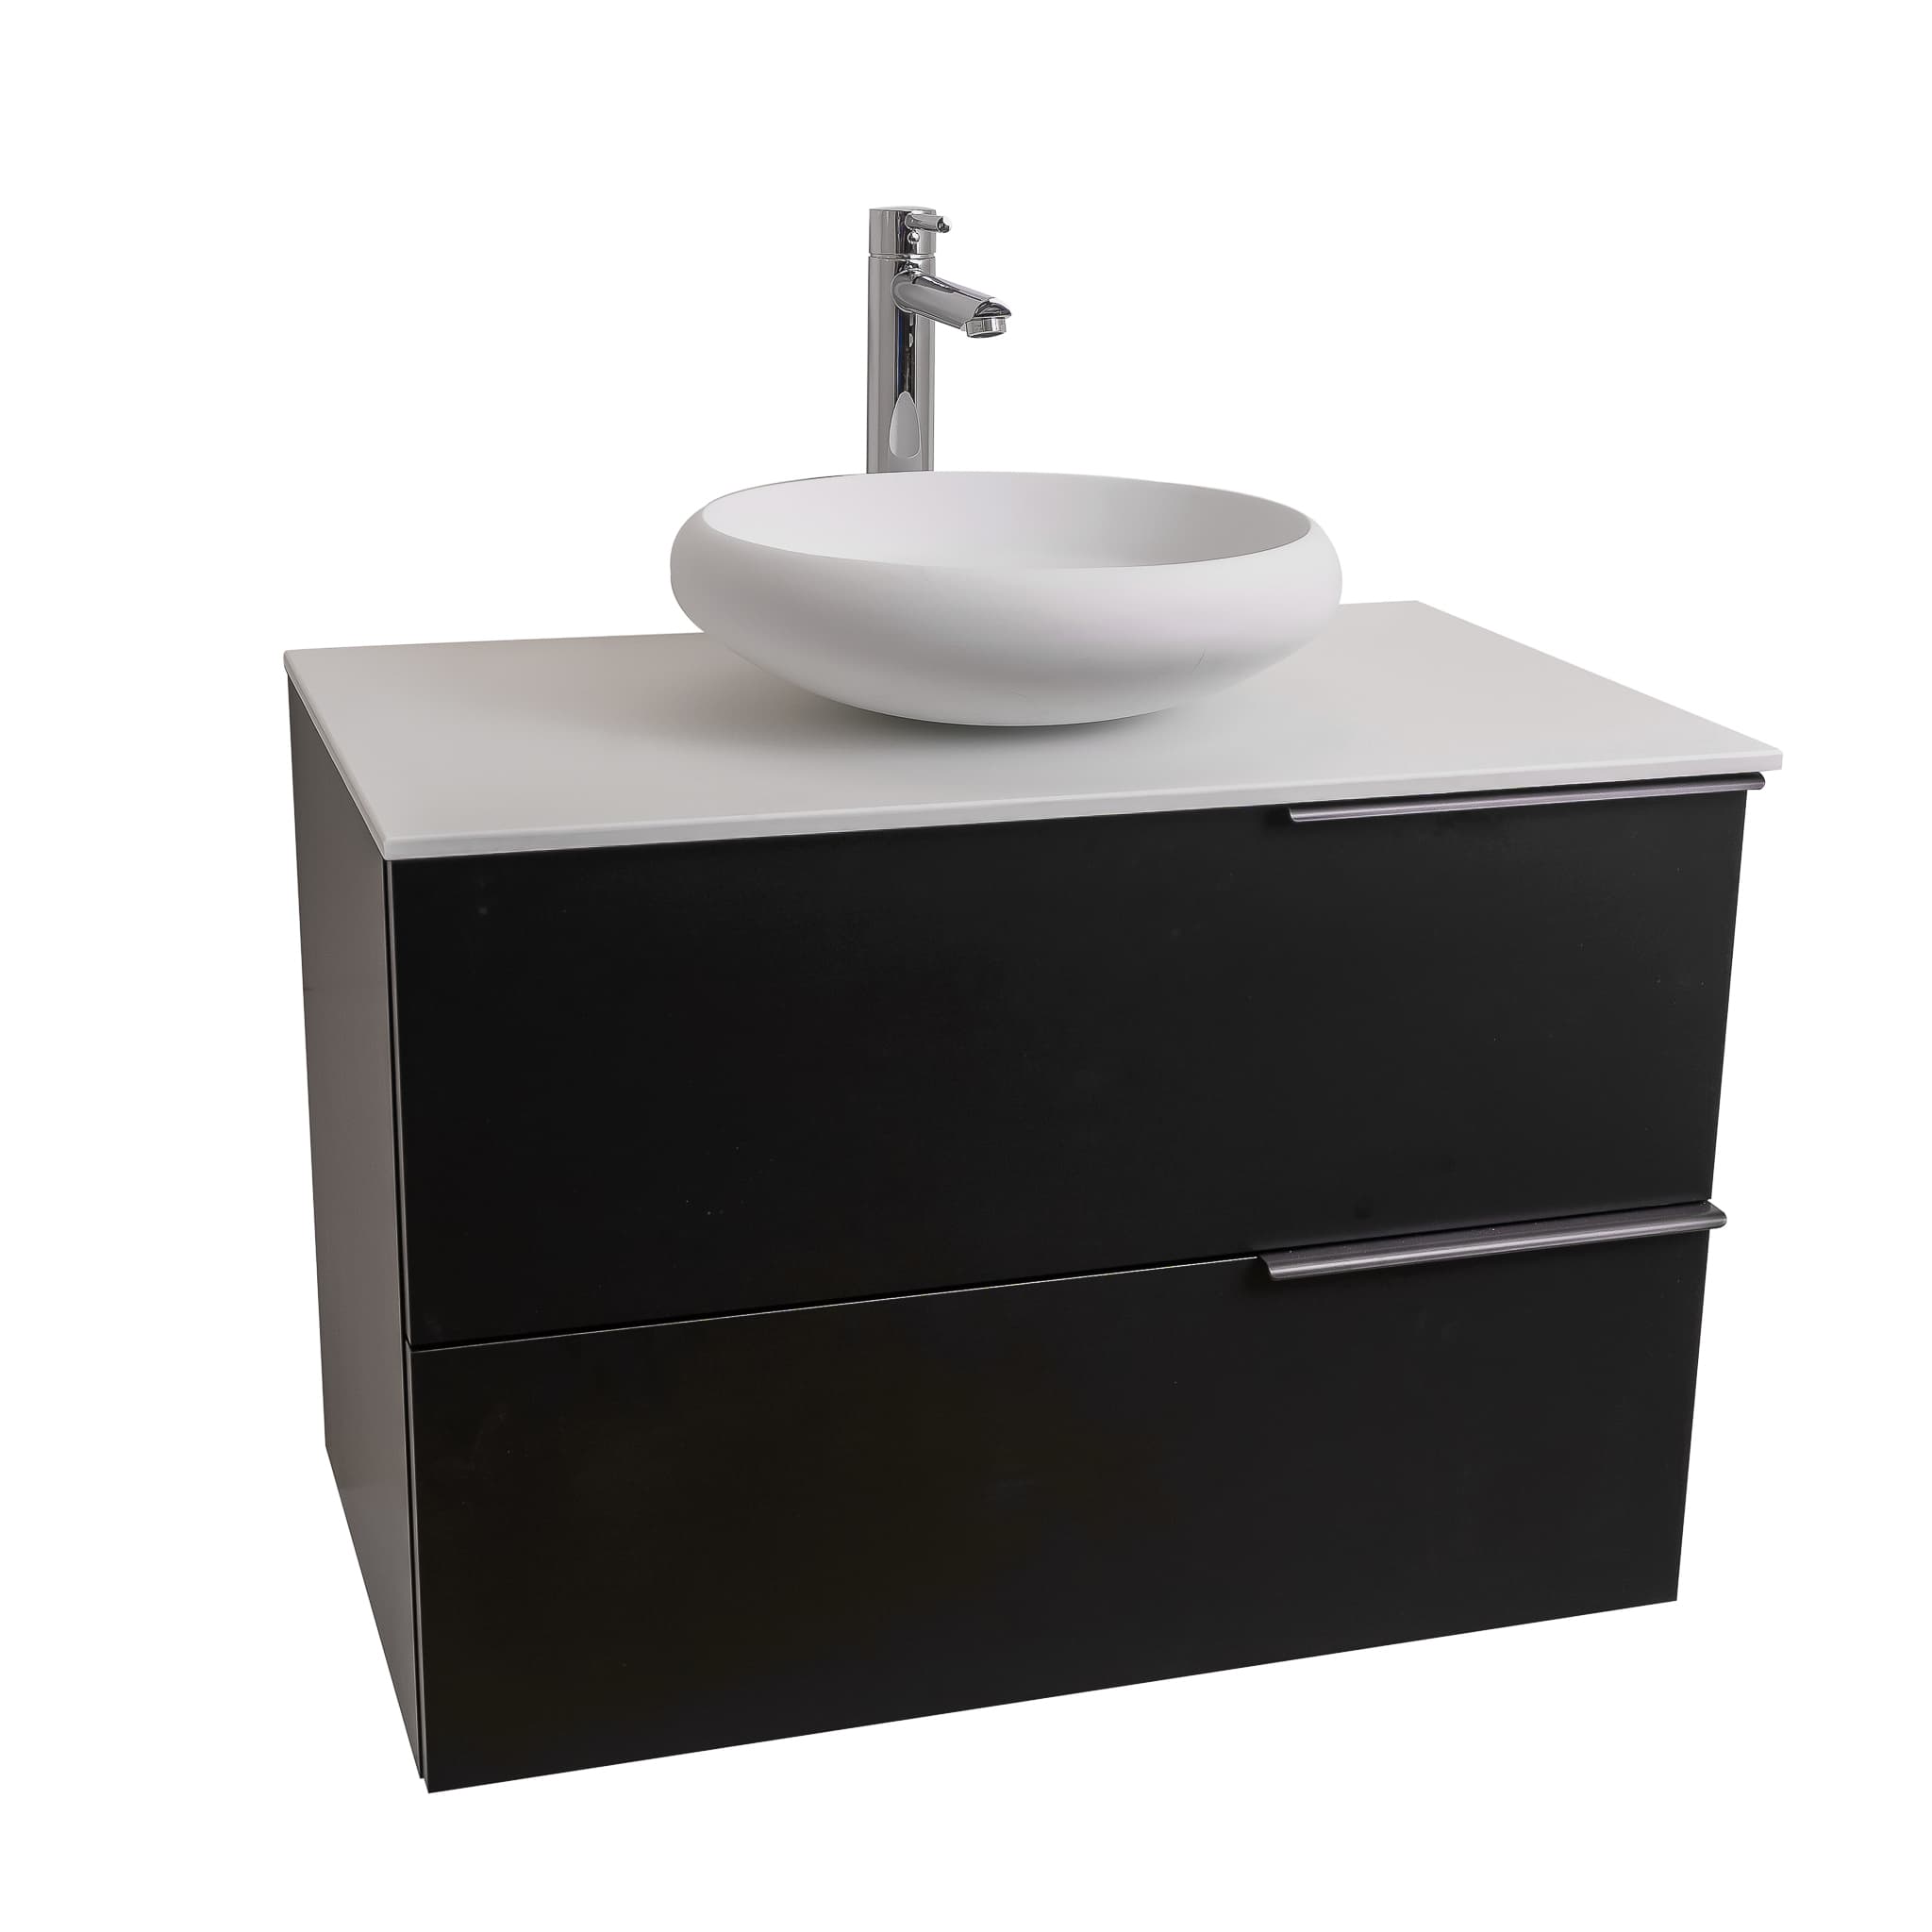 Mallorca 31.5 Matte Black Cabinet, Solid Surface Flat White Counter And Round Solid Surface White Basin 1153, Wall Mounted Modern Vanity Set